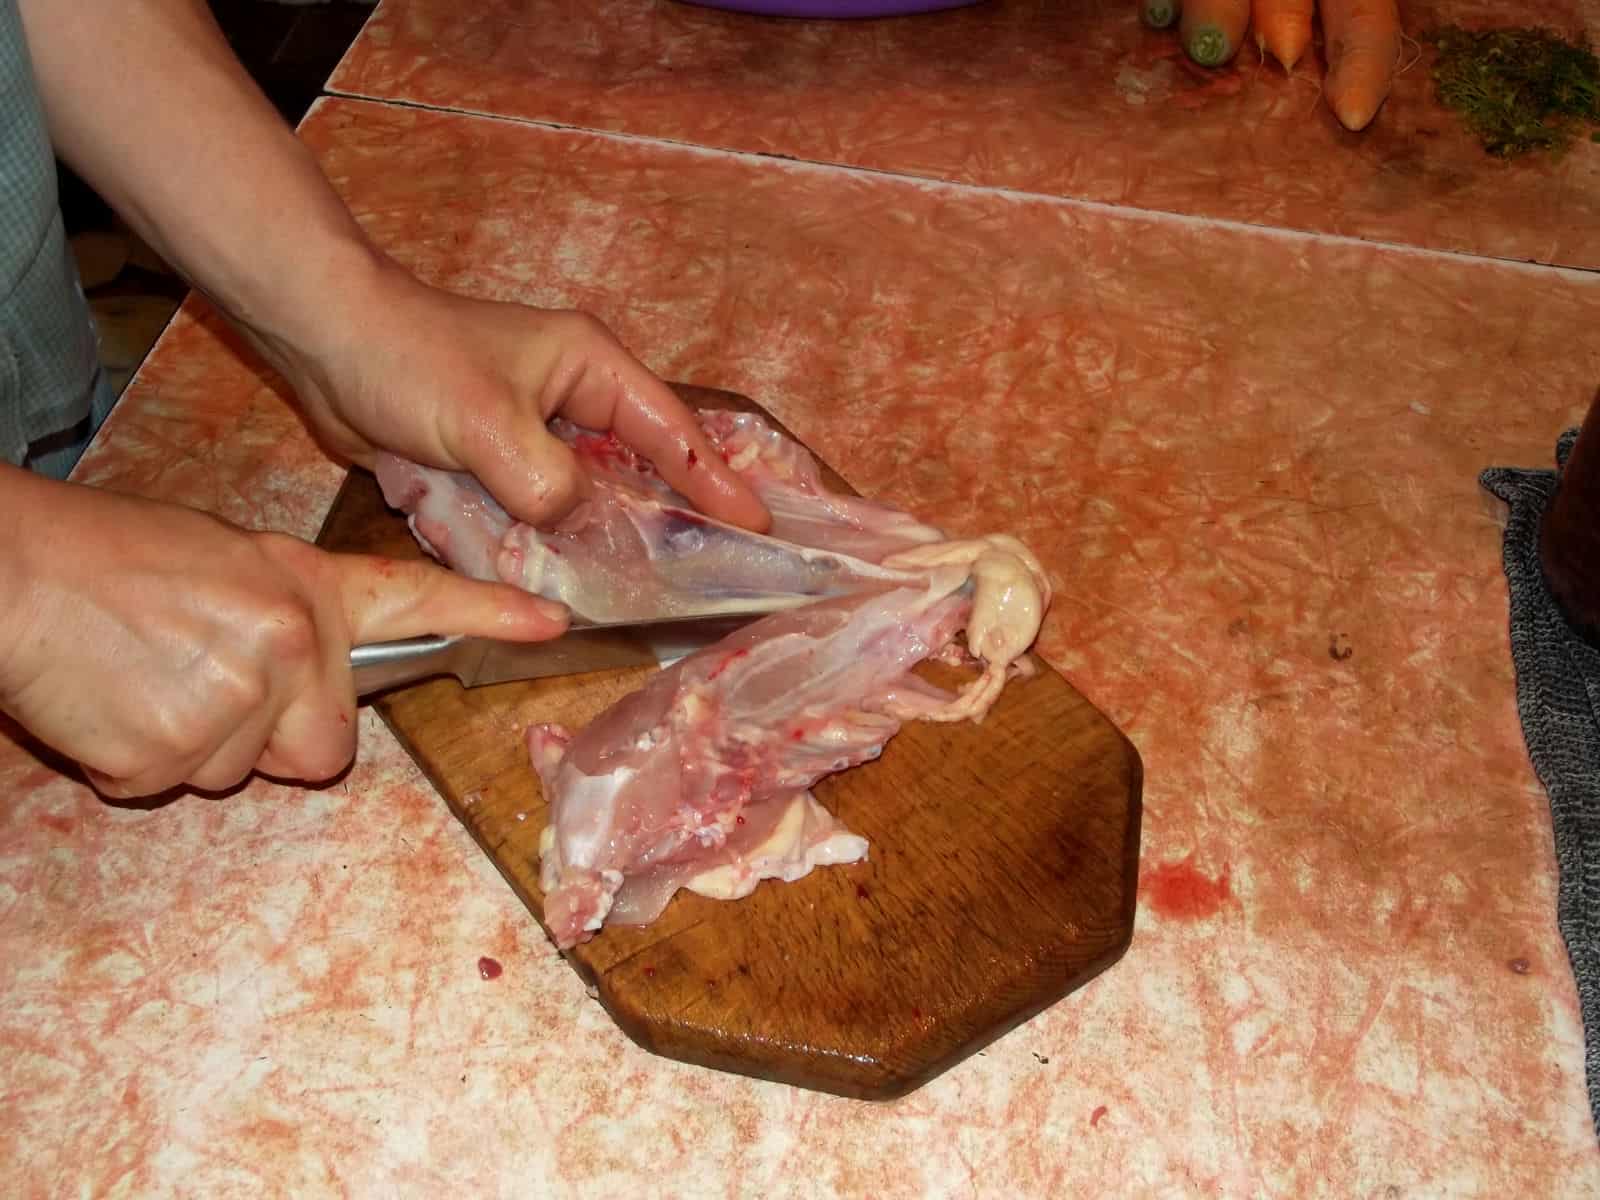 After you've broken the bones with the shears, use your knife to cut the meat away from one side of the keel bone, and separate the two halves of the breast.